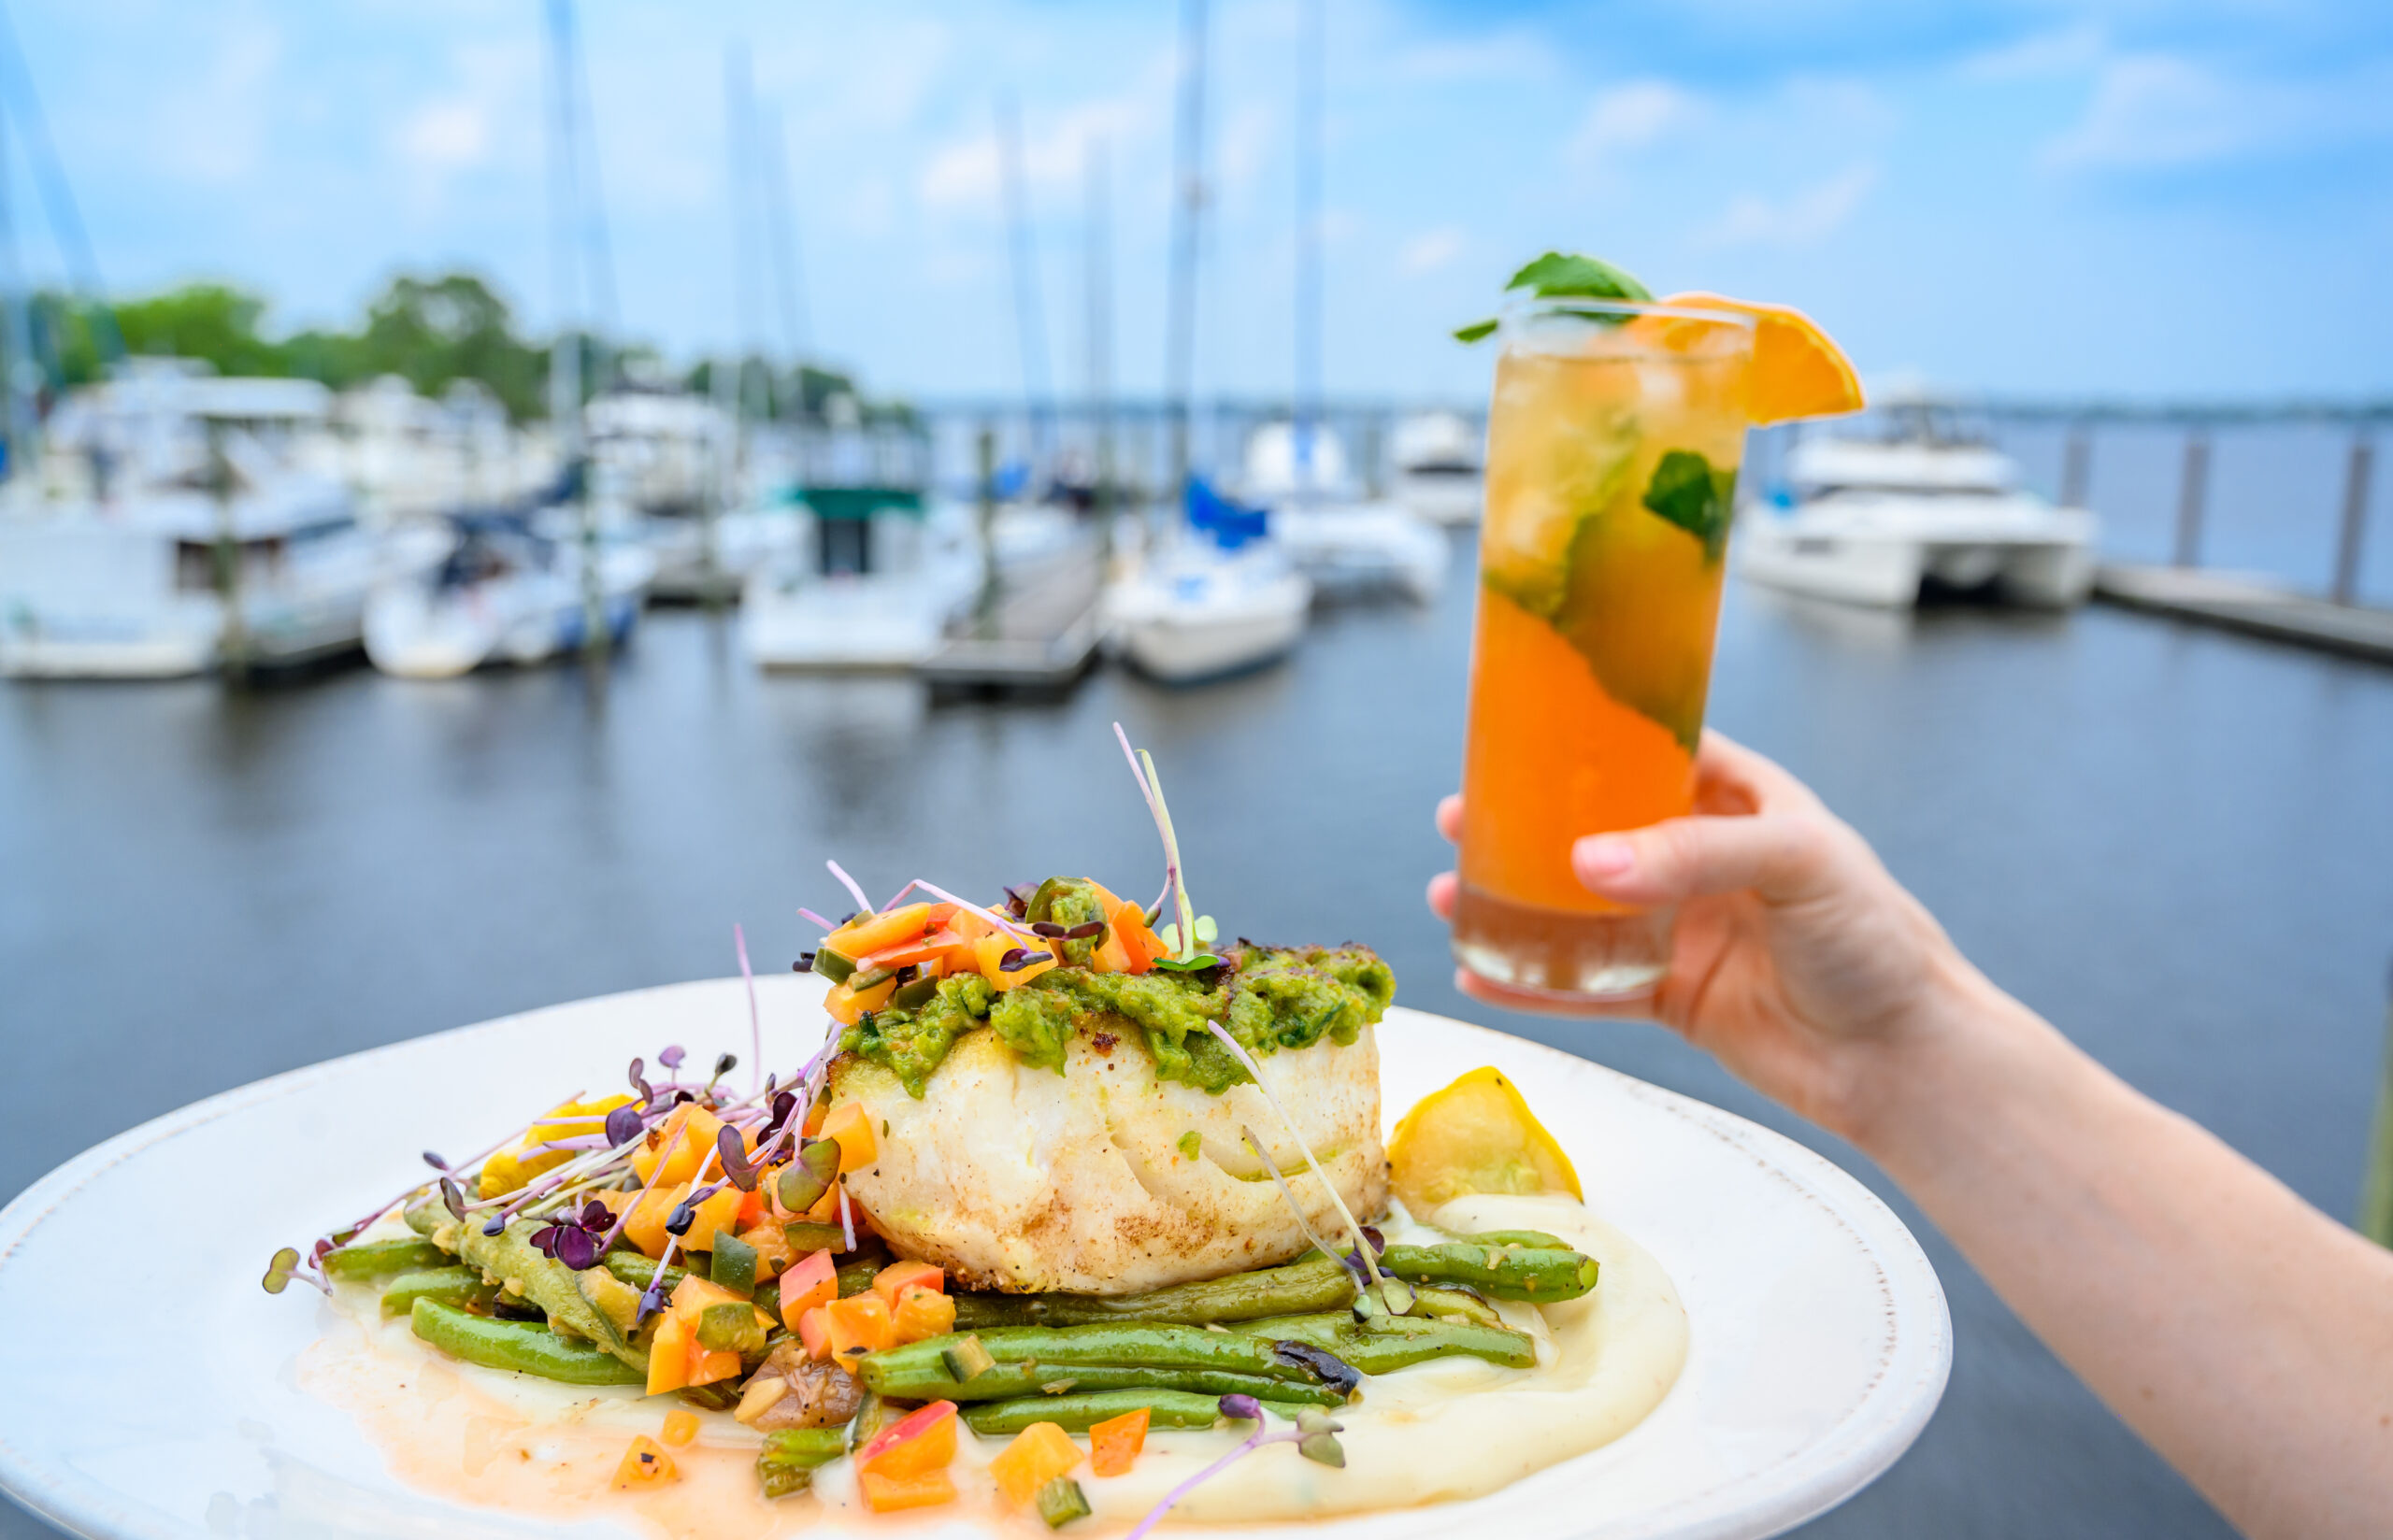 Fresh Catch and a "Rossalie" craft cocktail at Persimmons restaurant in New Bern. Credit: VisitNC.com